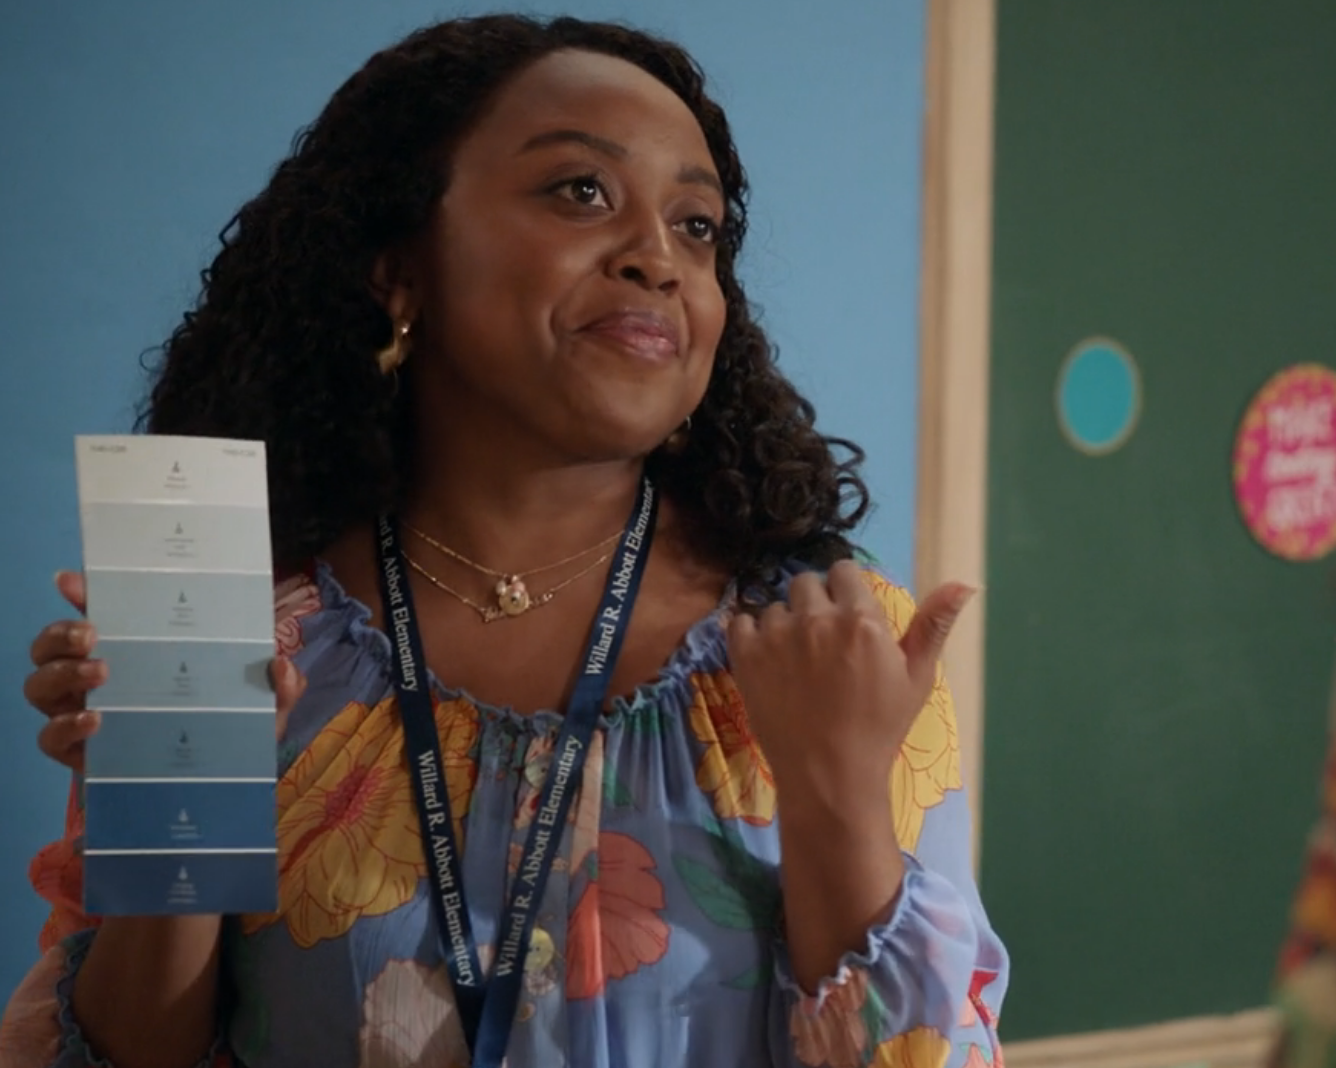 Abbott Elementary Guest Star Taraji P. Henson On Landing Her Role And Why  She Feels A Personal Connection To The Show | Cinemablend